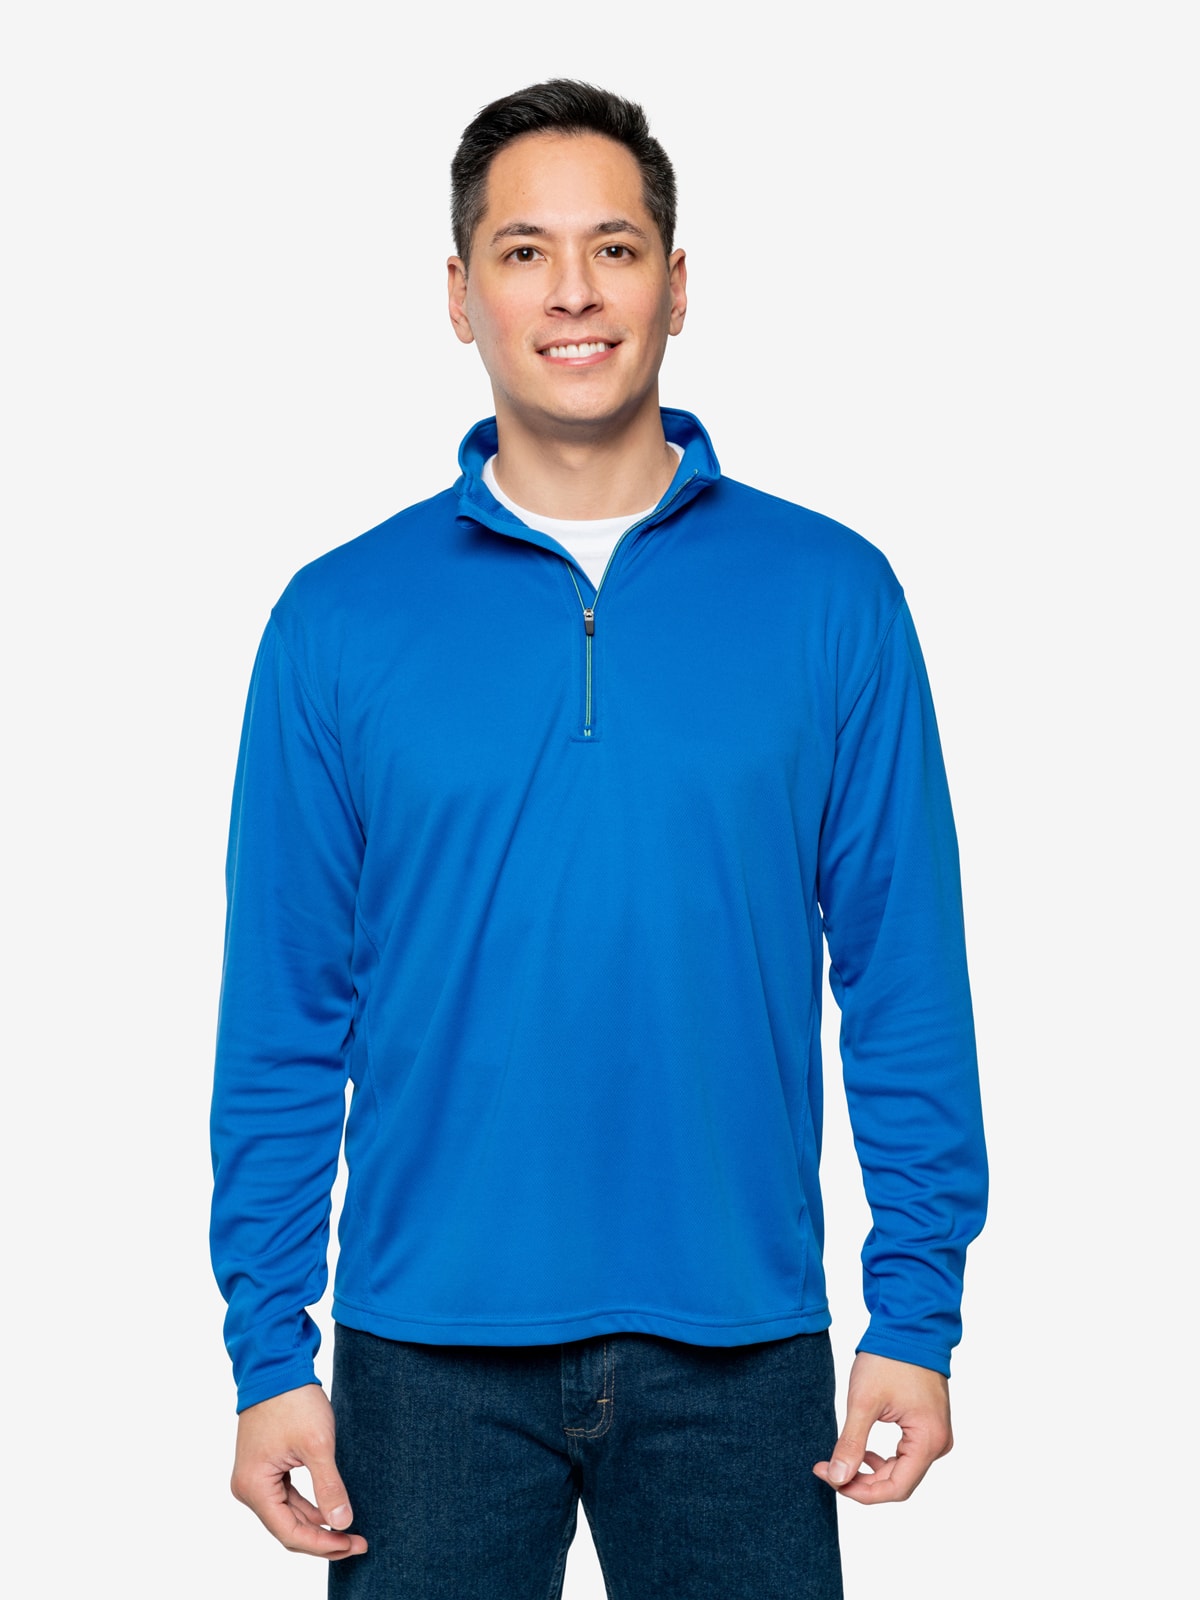 Men's Insect Repellent Quarter Zip - Keep Bugs Away in Casual Style ...